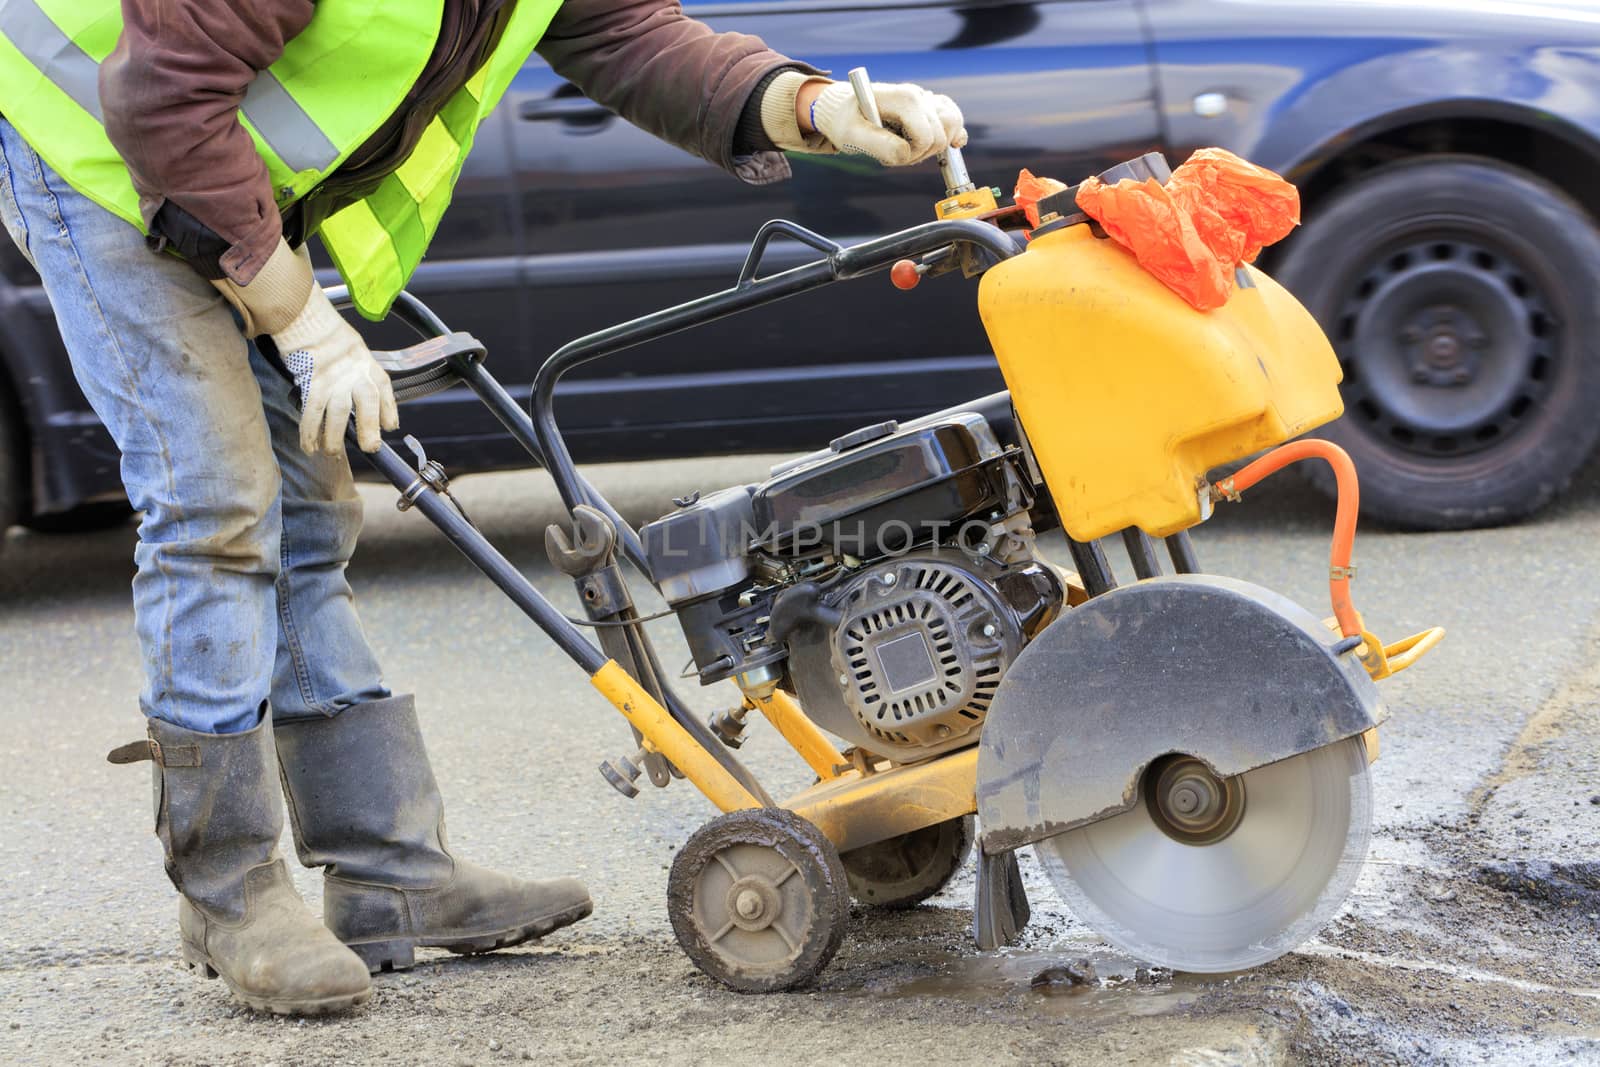 An employee of a road maintenance service in a green reflective vest removes old asphalt with a gasoline cutter during repairs on the roadway.